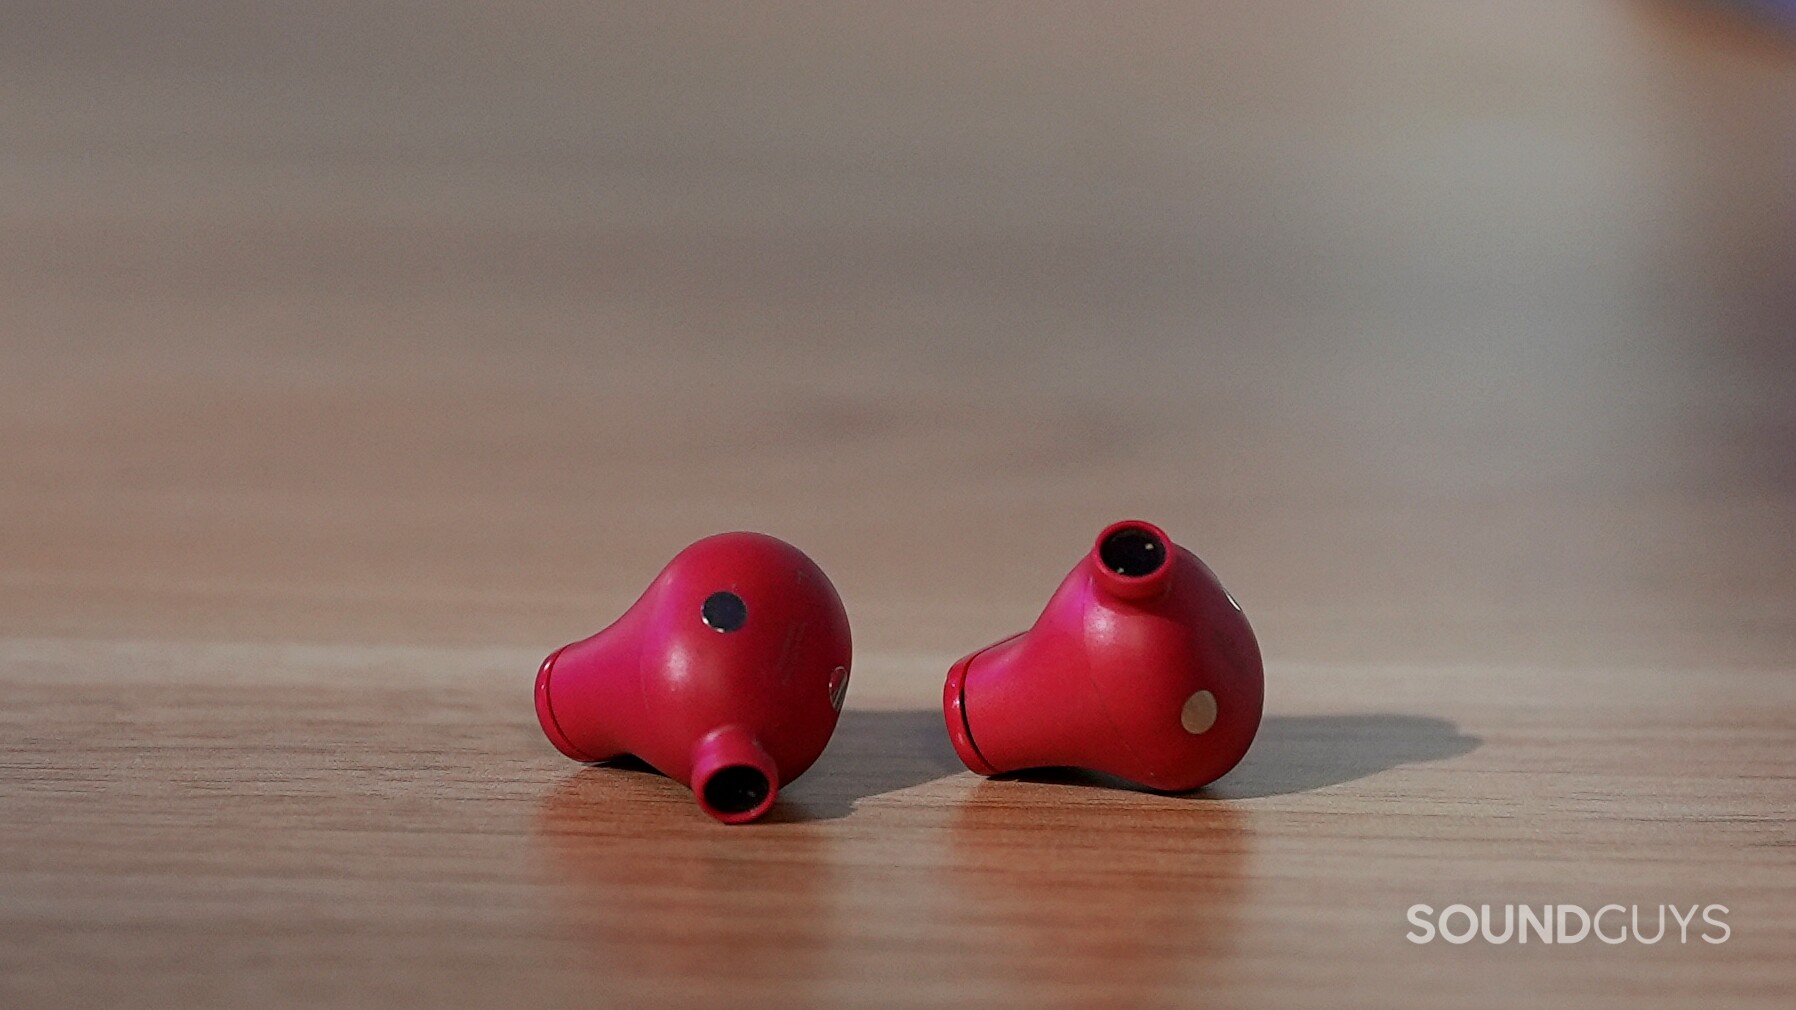 Beats Studio Buds noise cancelling true wireless earphones without the ear tips on to show the driver grilles.